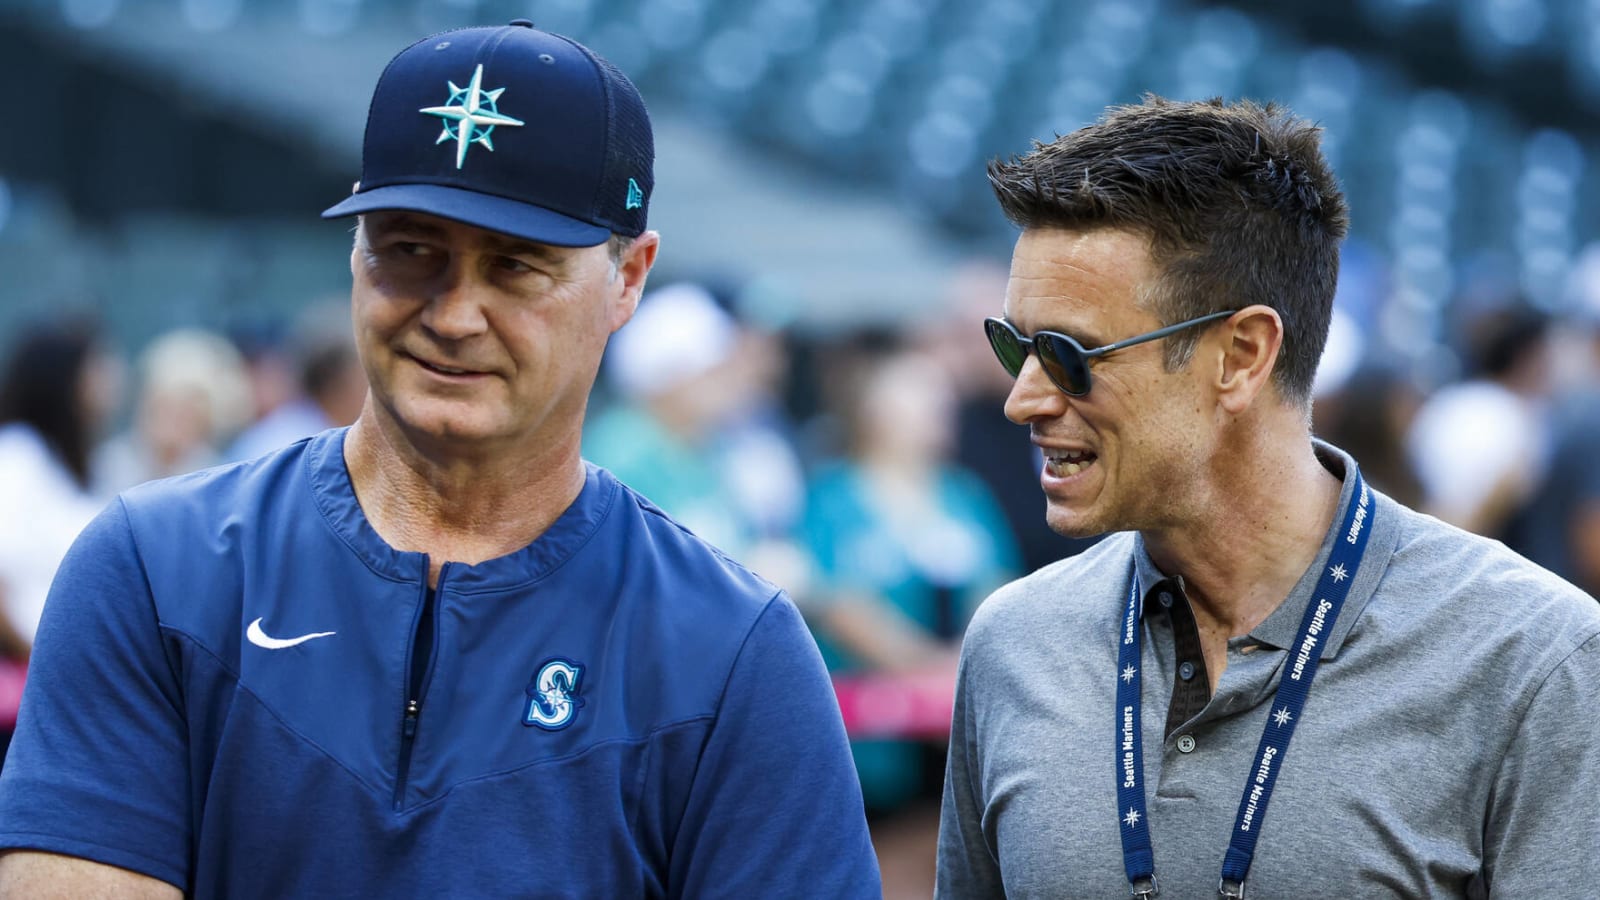 Dipoto: Mariners to pursue shortstops willing to play second base